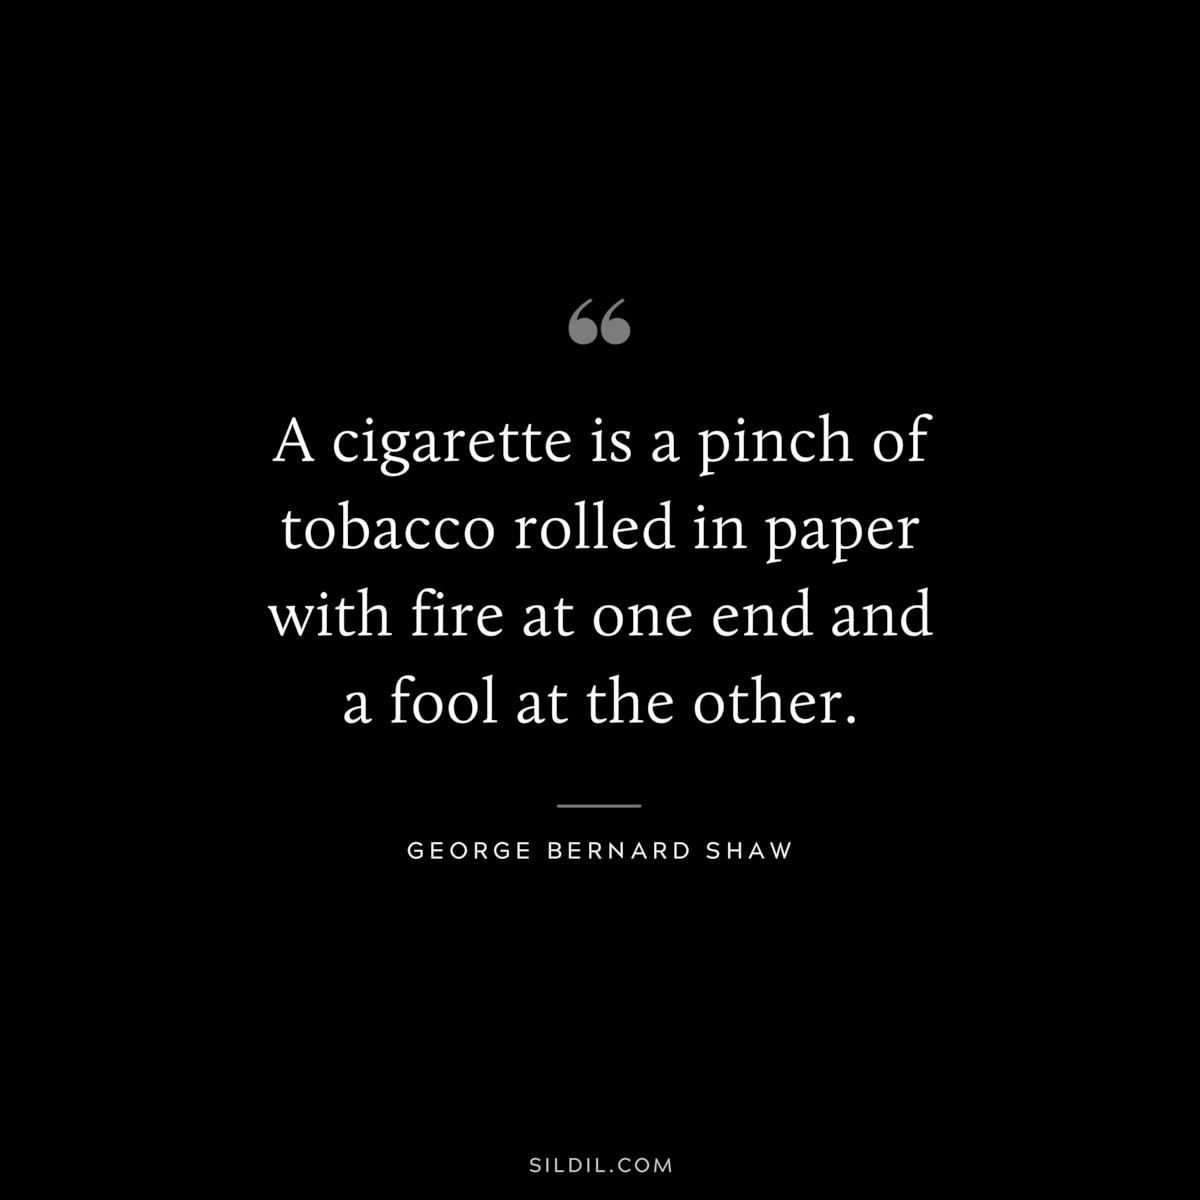 A cigarette is a pinch of tobacco rolled in paper with fire at one end and a fool at the other. ― George Bernard Shaw